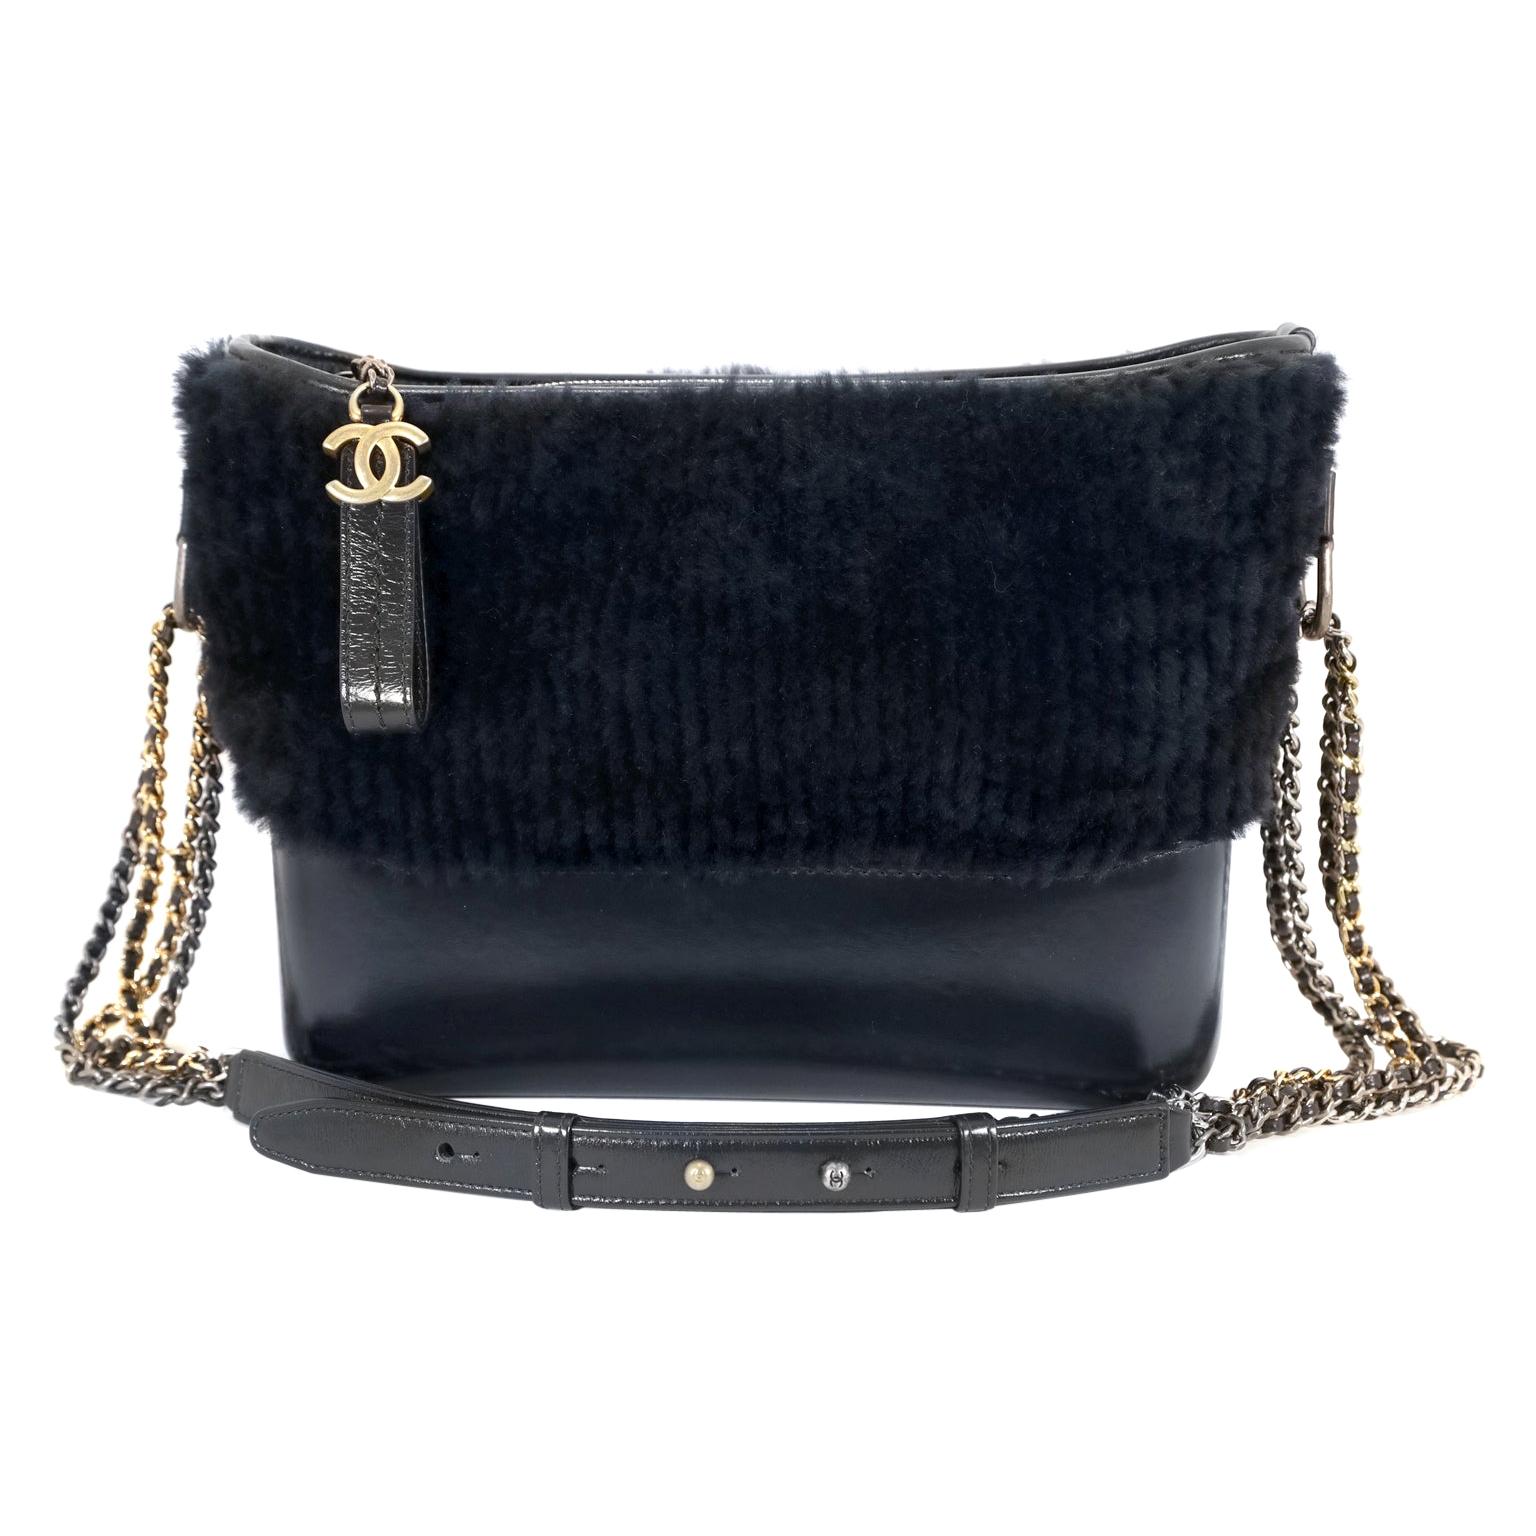 Chanel Navy Shearling Fur and Leather Gabrielle Bag